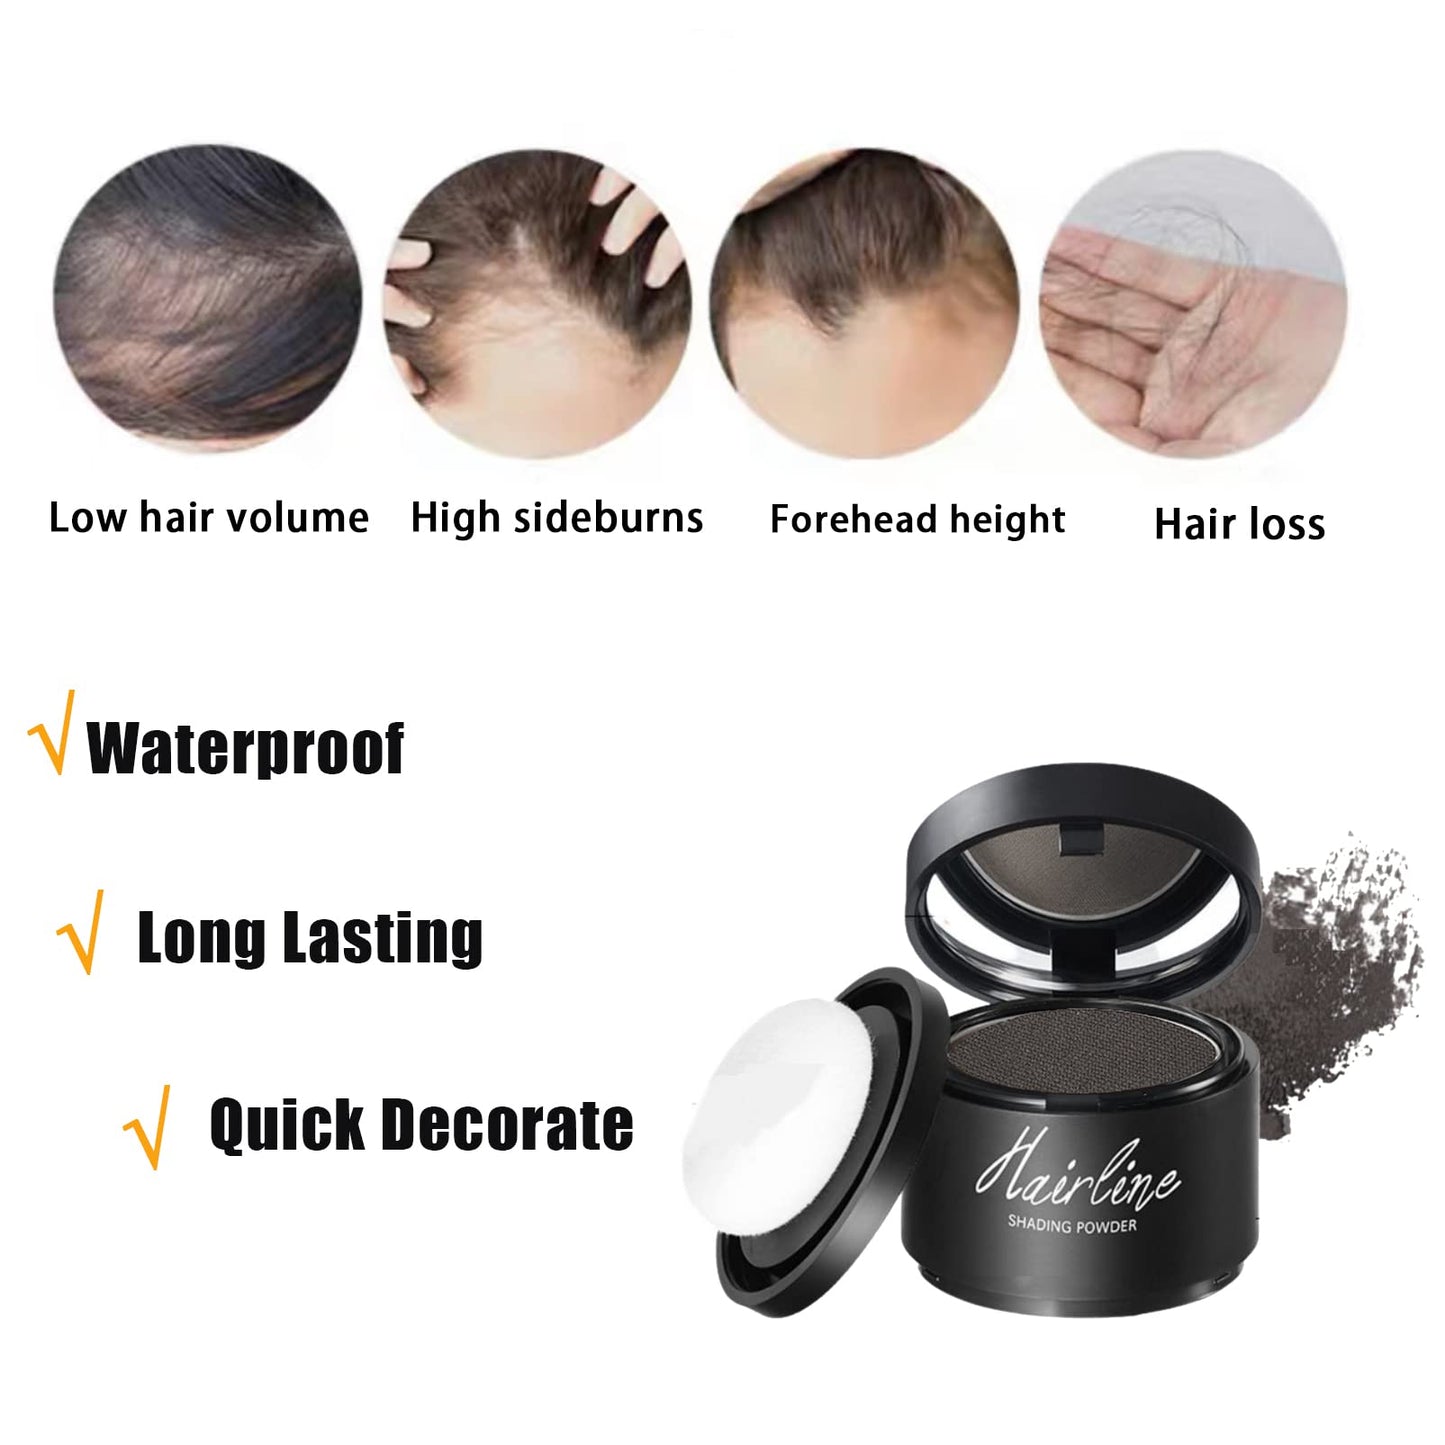 Hairline Powder,Root Cover Up,Hair Shadow Powder, Dark Gray Hair Root Dye Shadow Cover, Root Concealer,Beard Dye,Hair Touch-Up for Thin Hair Grey Hairline Quick Cover Unisex,Waterproof(Dark Brown)